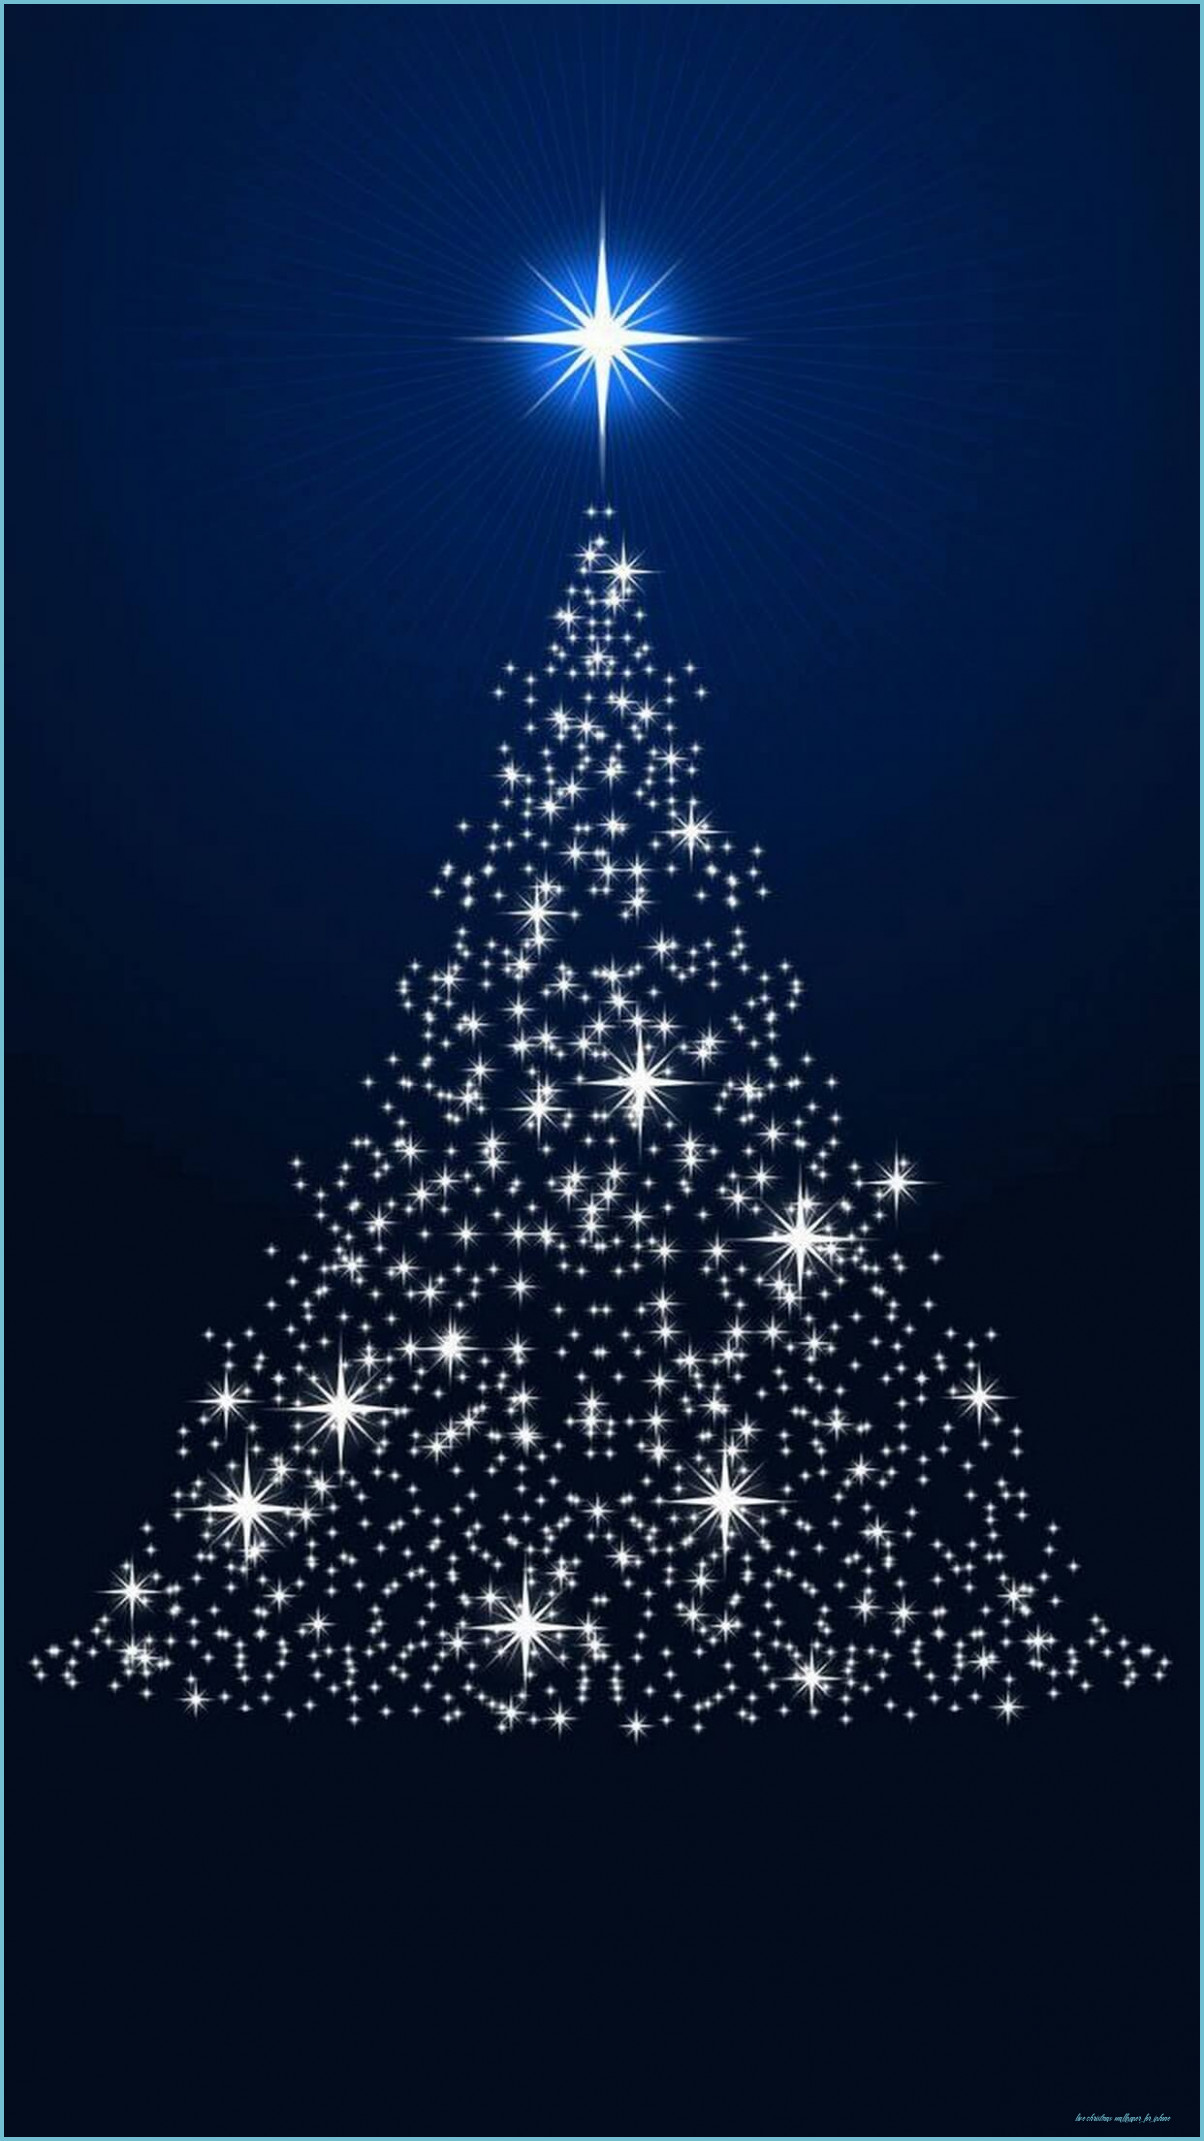 Attending Live Christmas Wallpaper For iPhone Can Be A